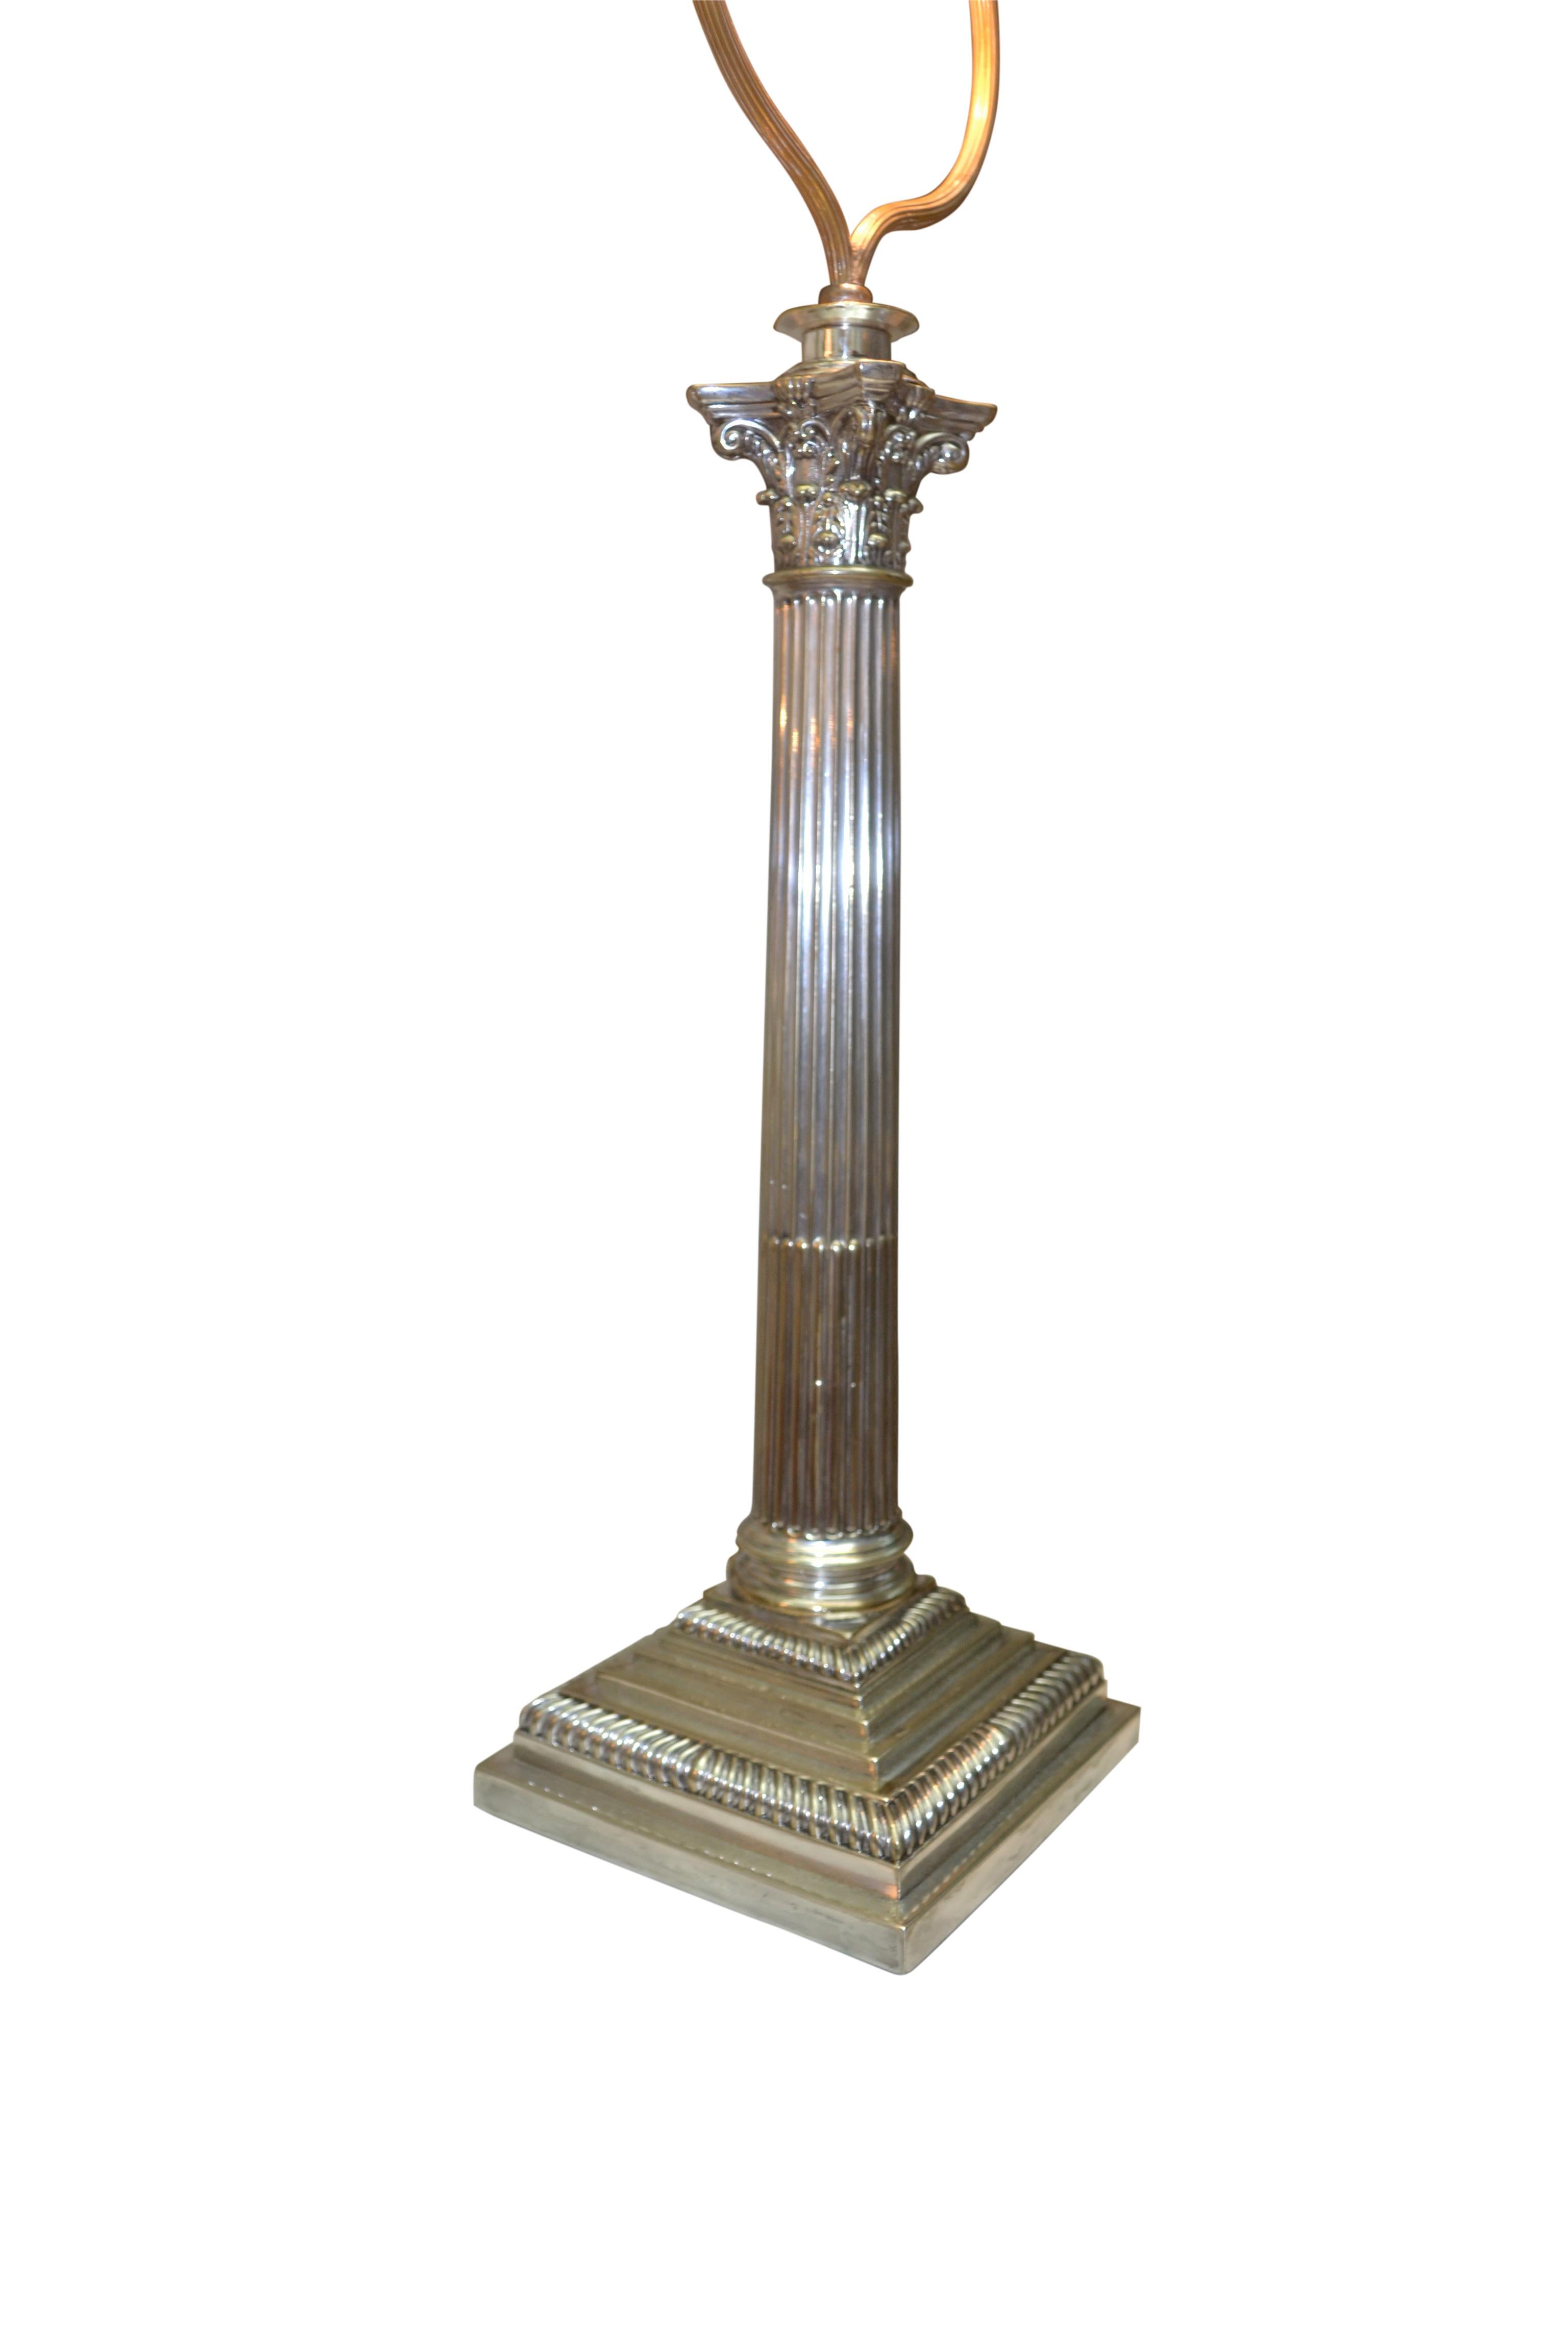 A neoclassical Edwardian English fluted column lamp capped by a Corinthian capital and set on a stepped square base.